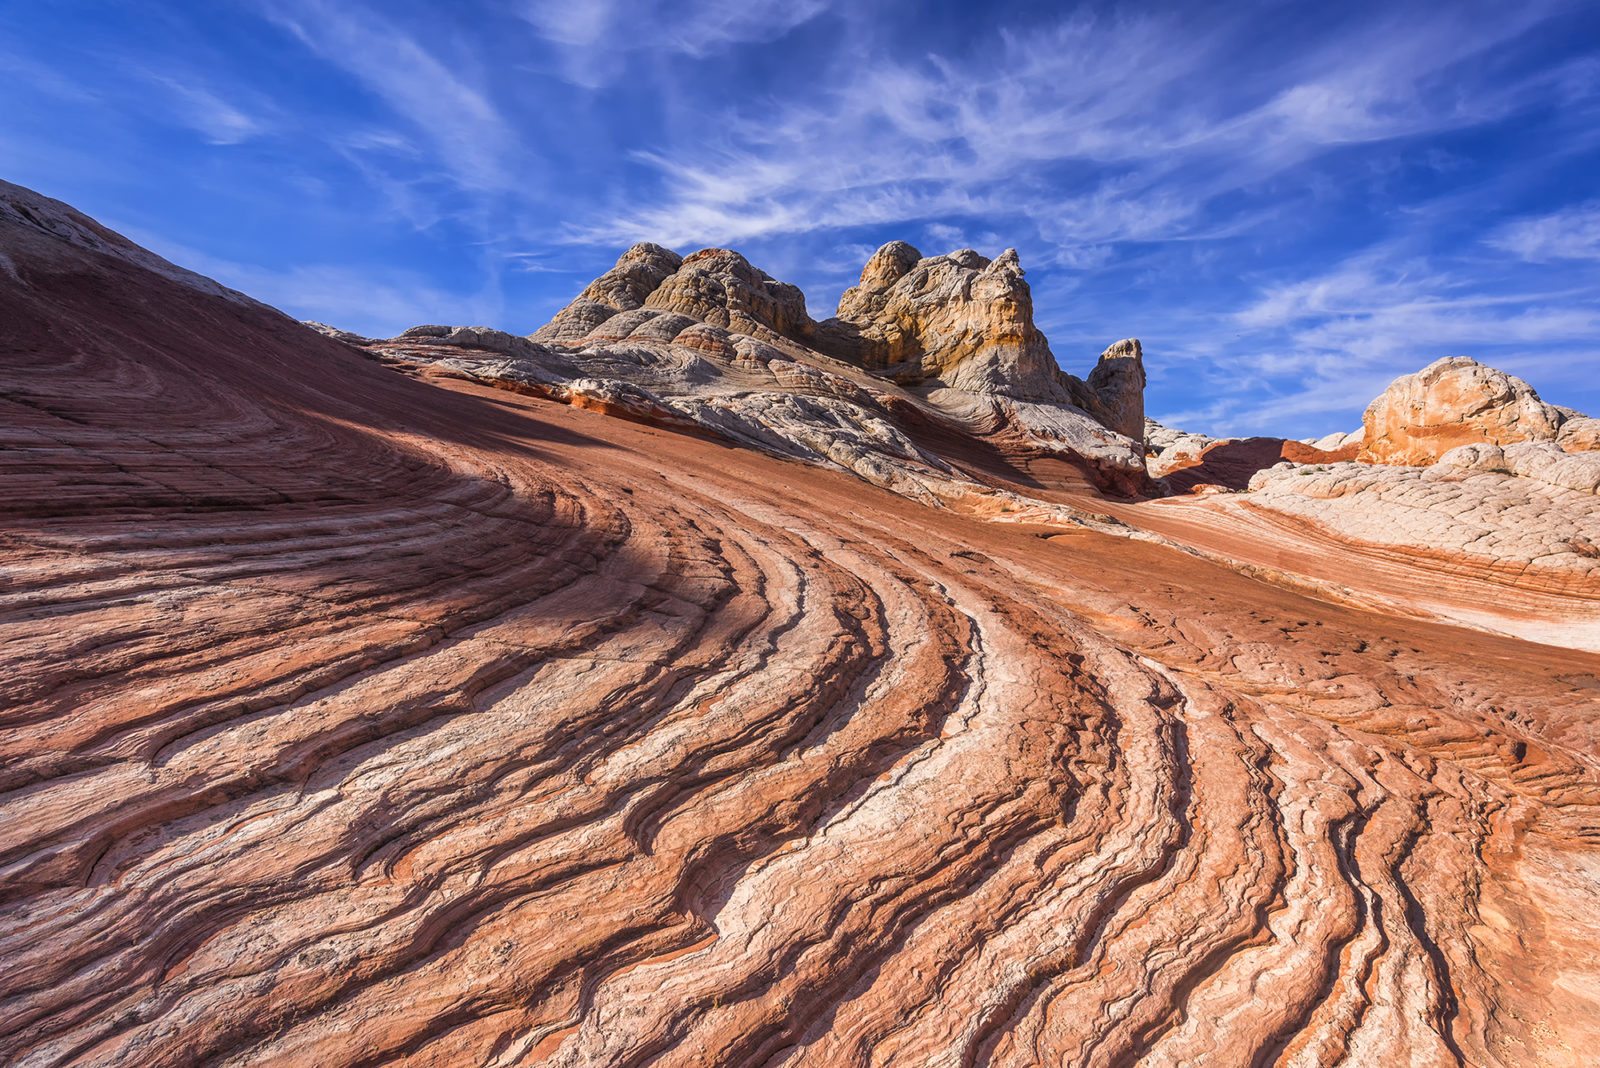 Today’s Photo Of The Day is “White Pocket” by Eunice Eunjin Oh. Location: Vermilion Cliffs National Monument, Arizona.